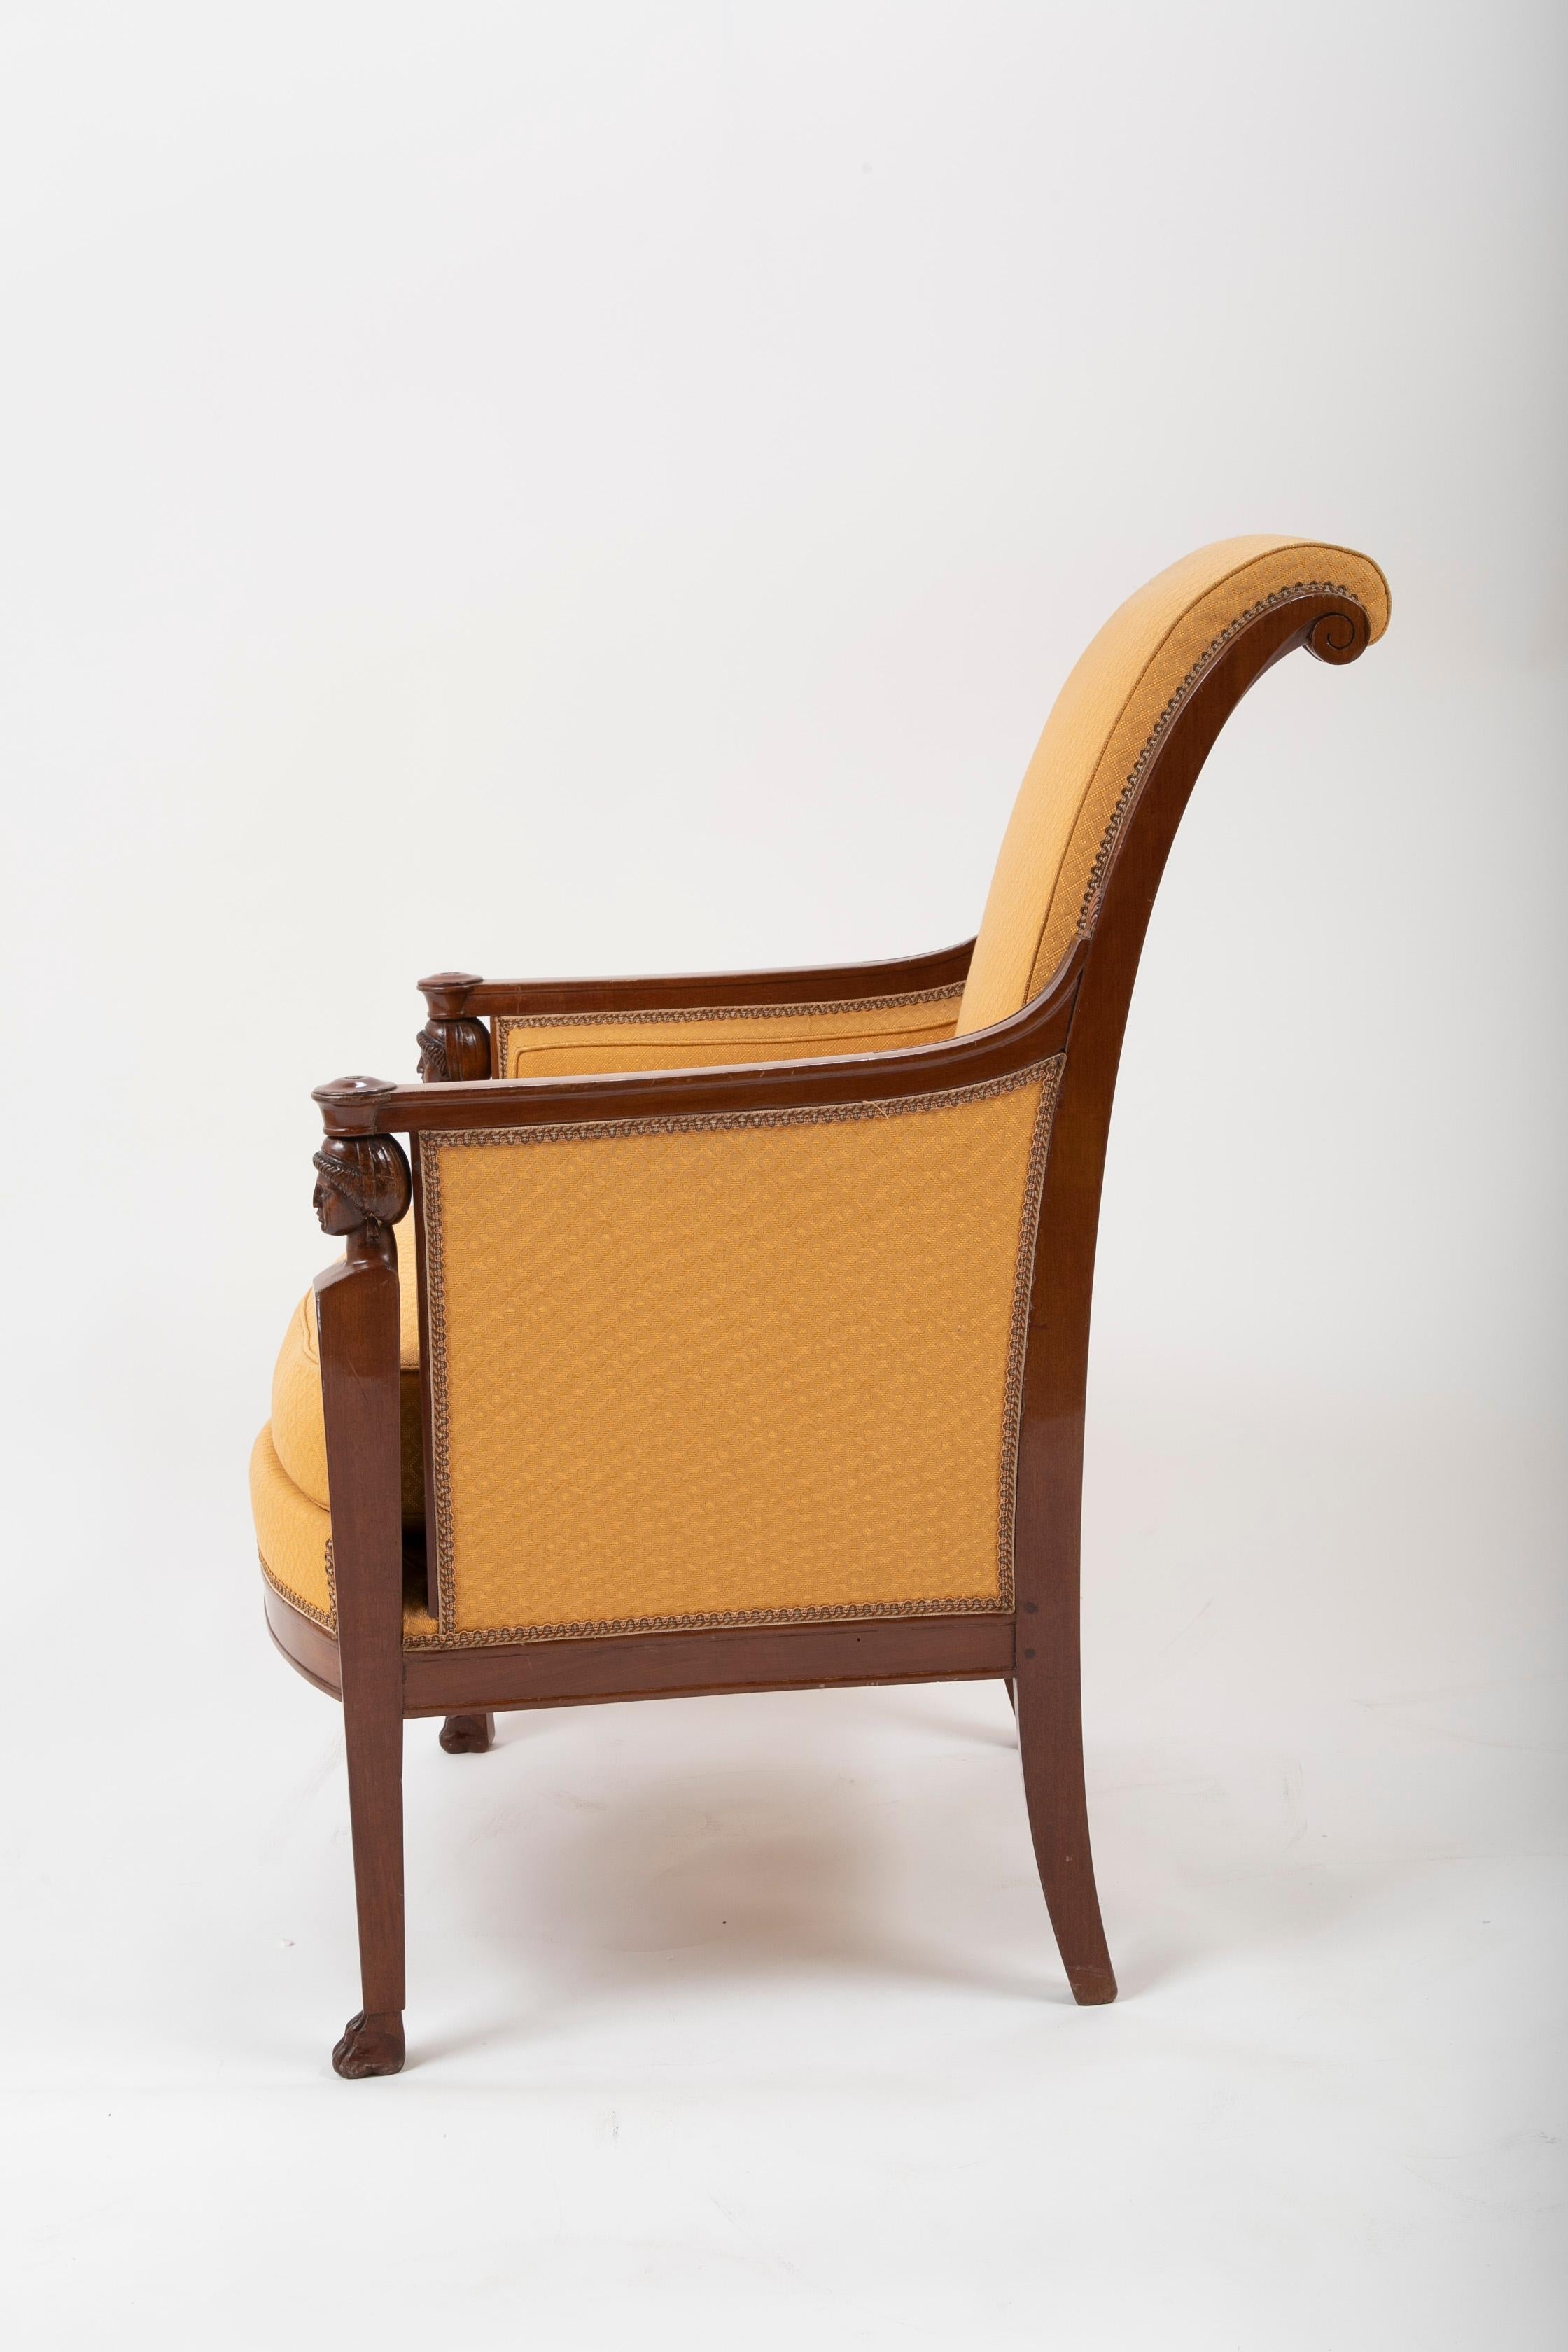 Carved Pair of French Consulat Armchairs in the Egyptian Revival Taste